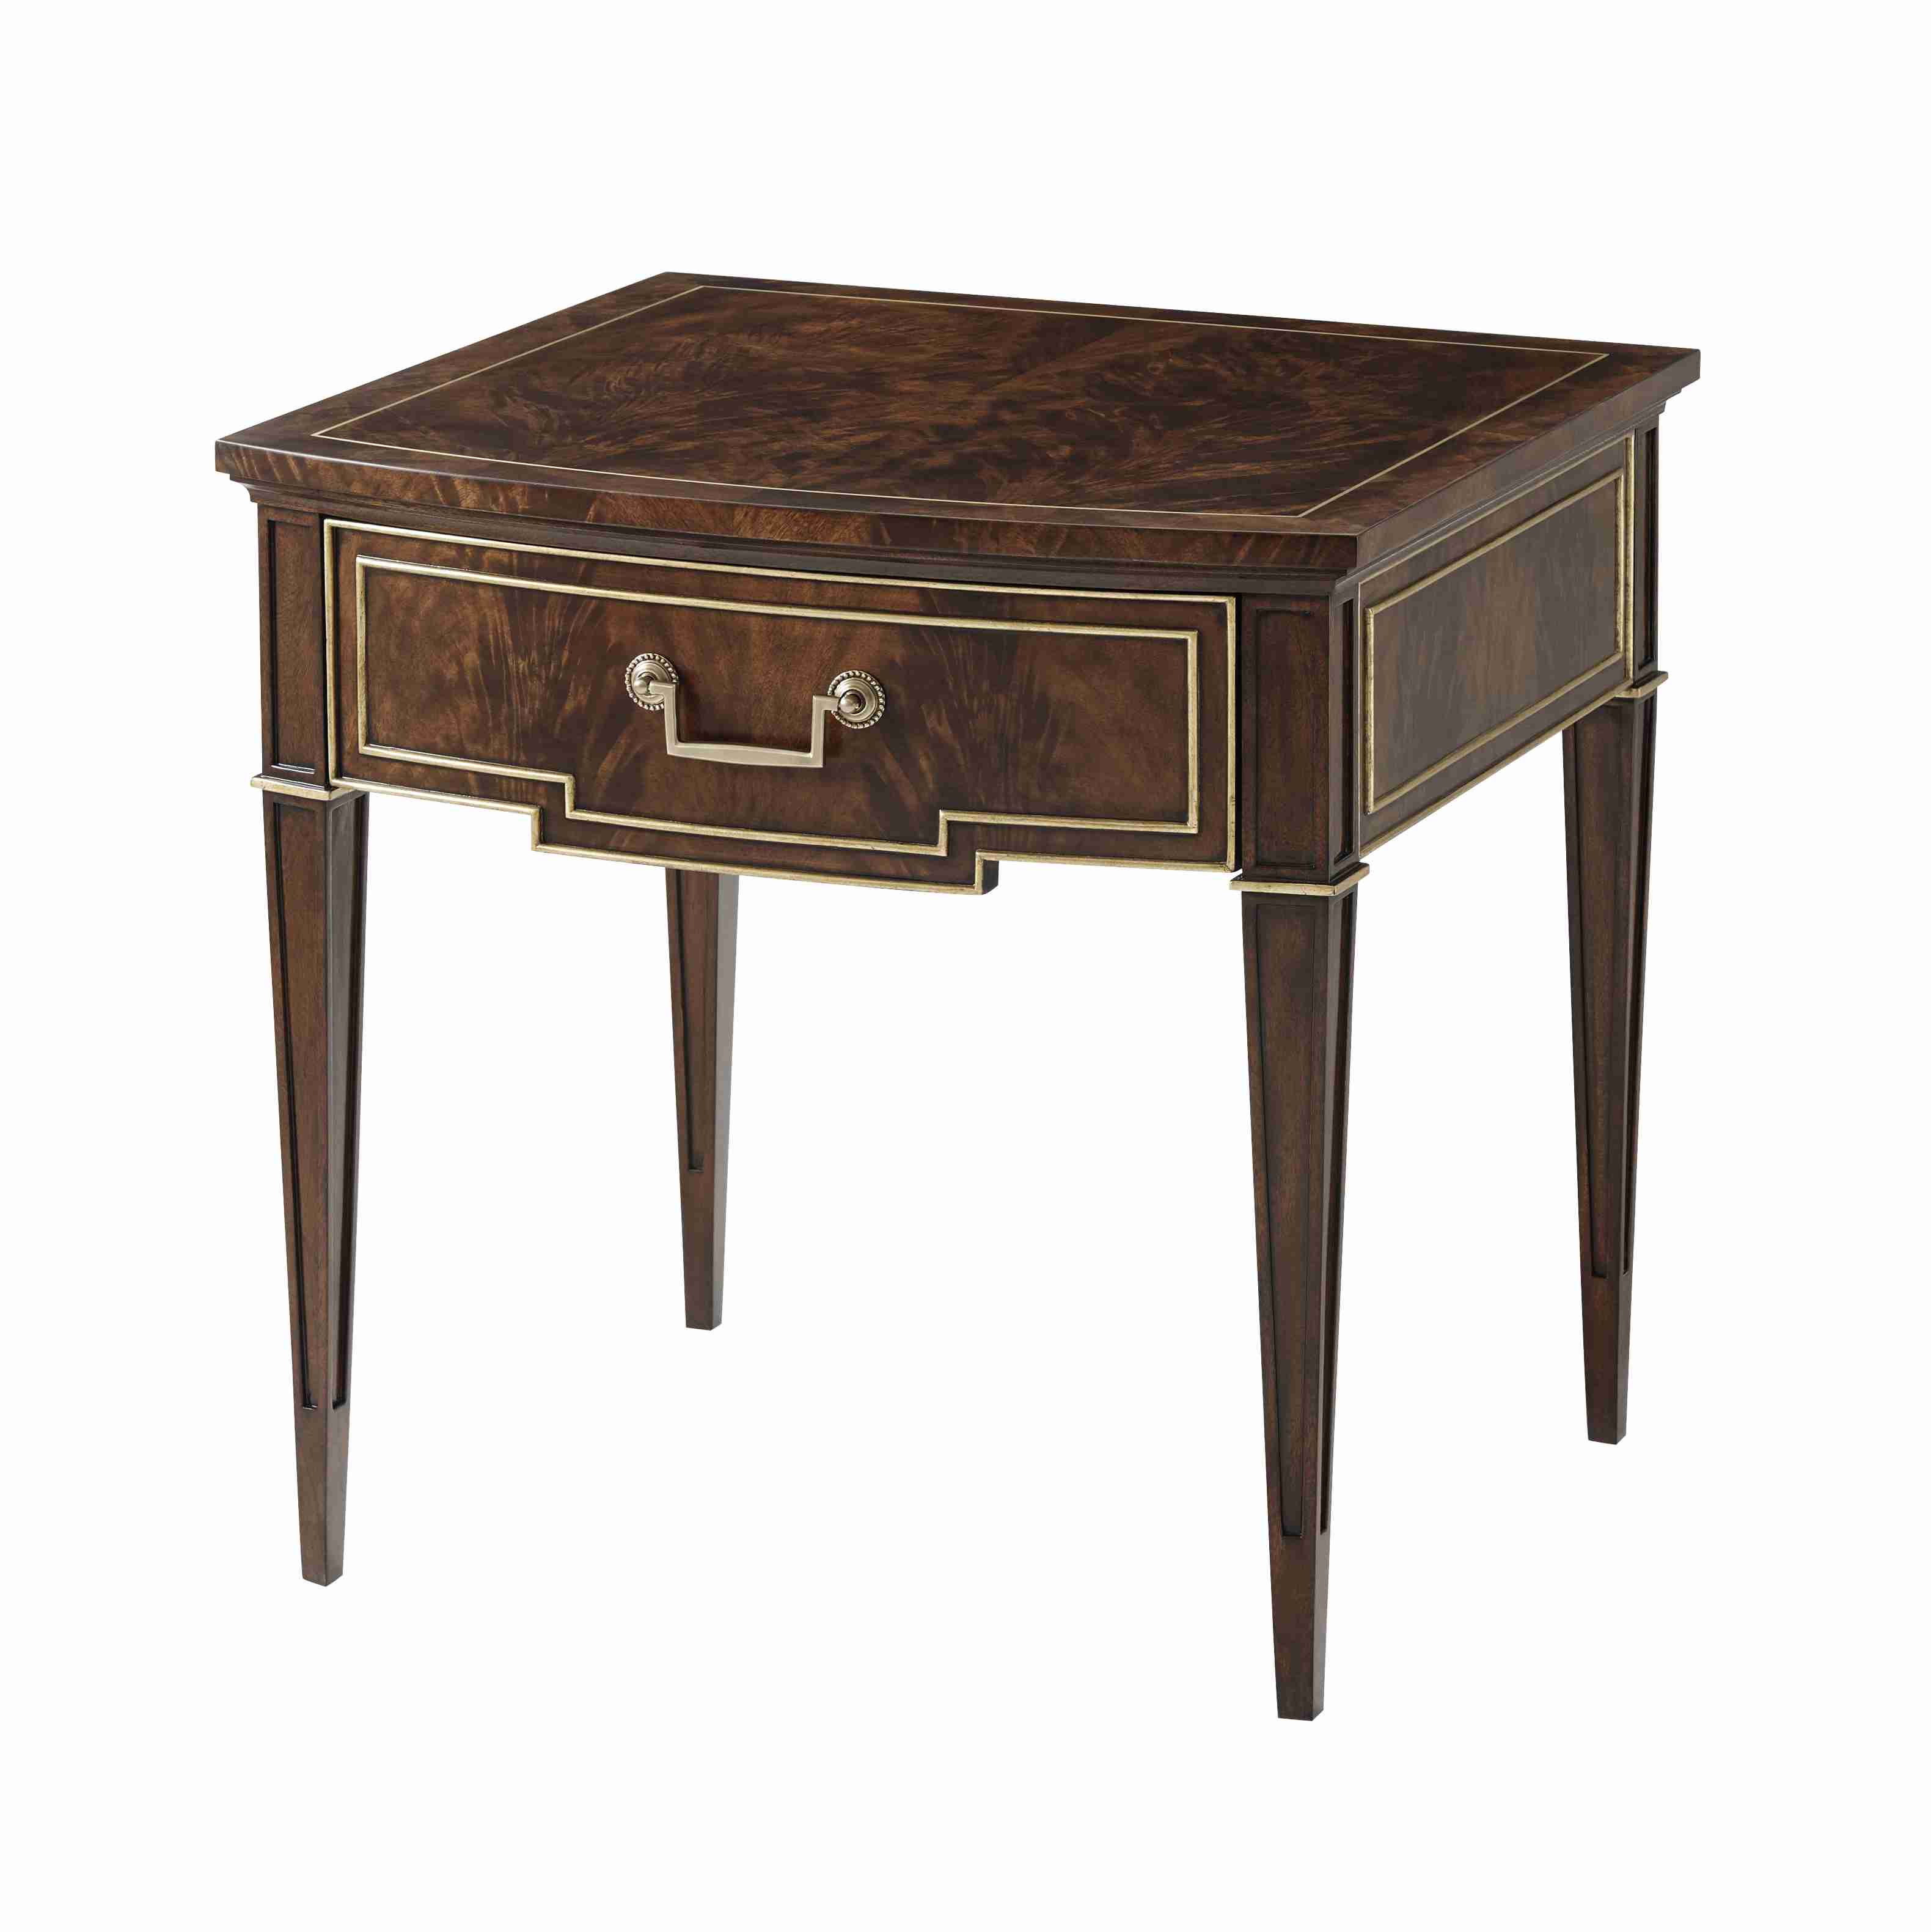 TOSCA (SQUARE) SIDE TABLE